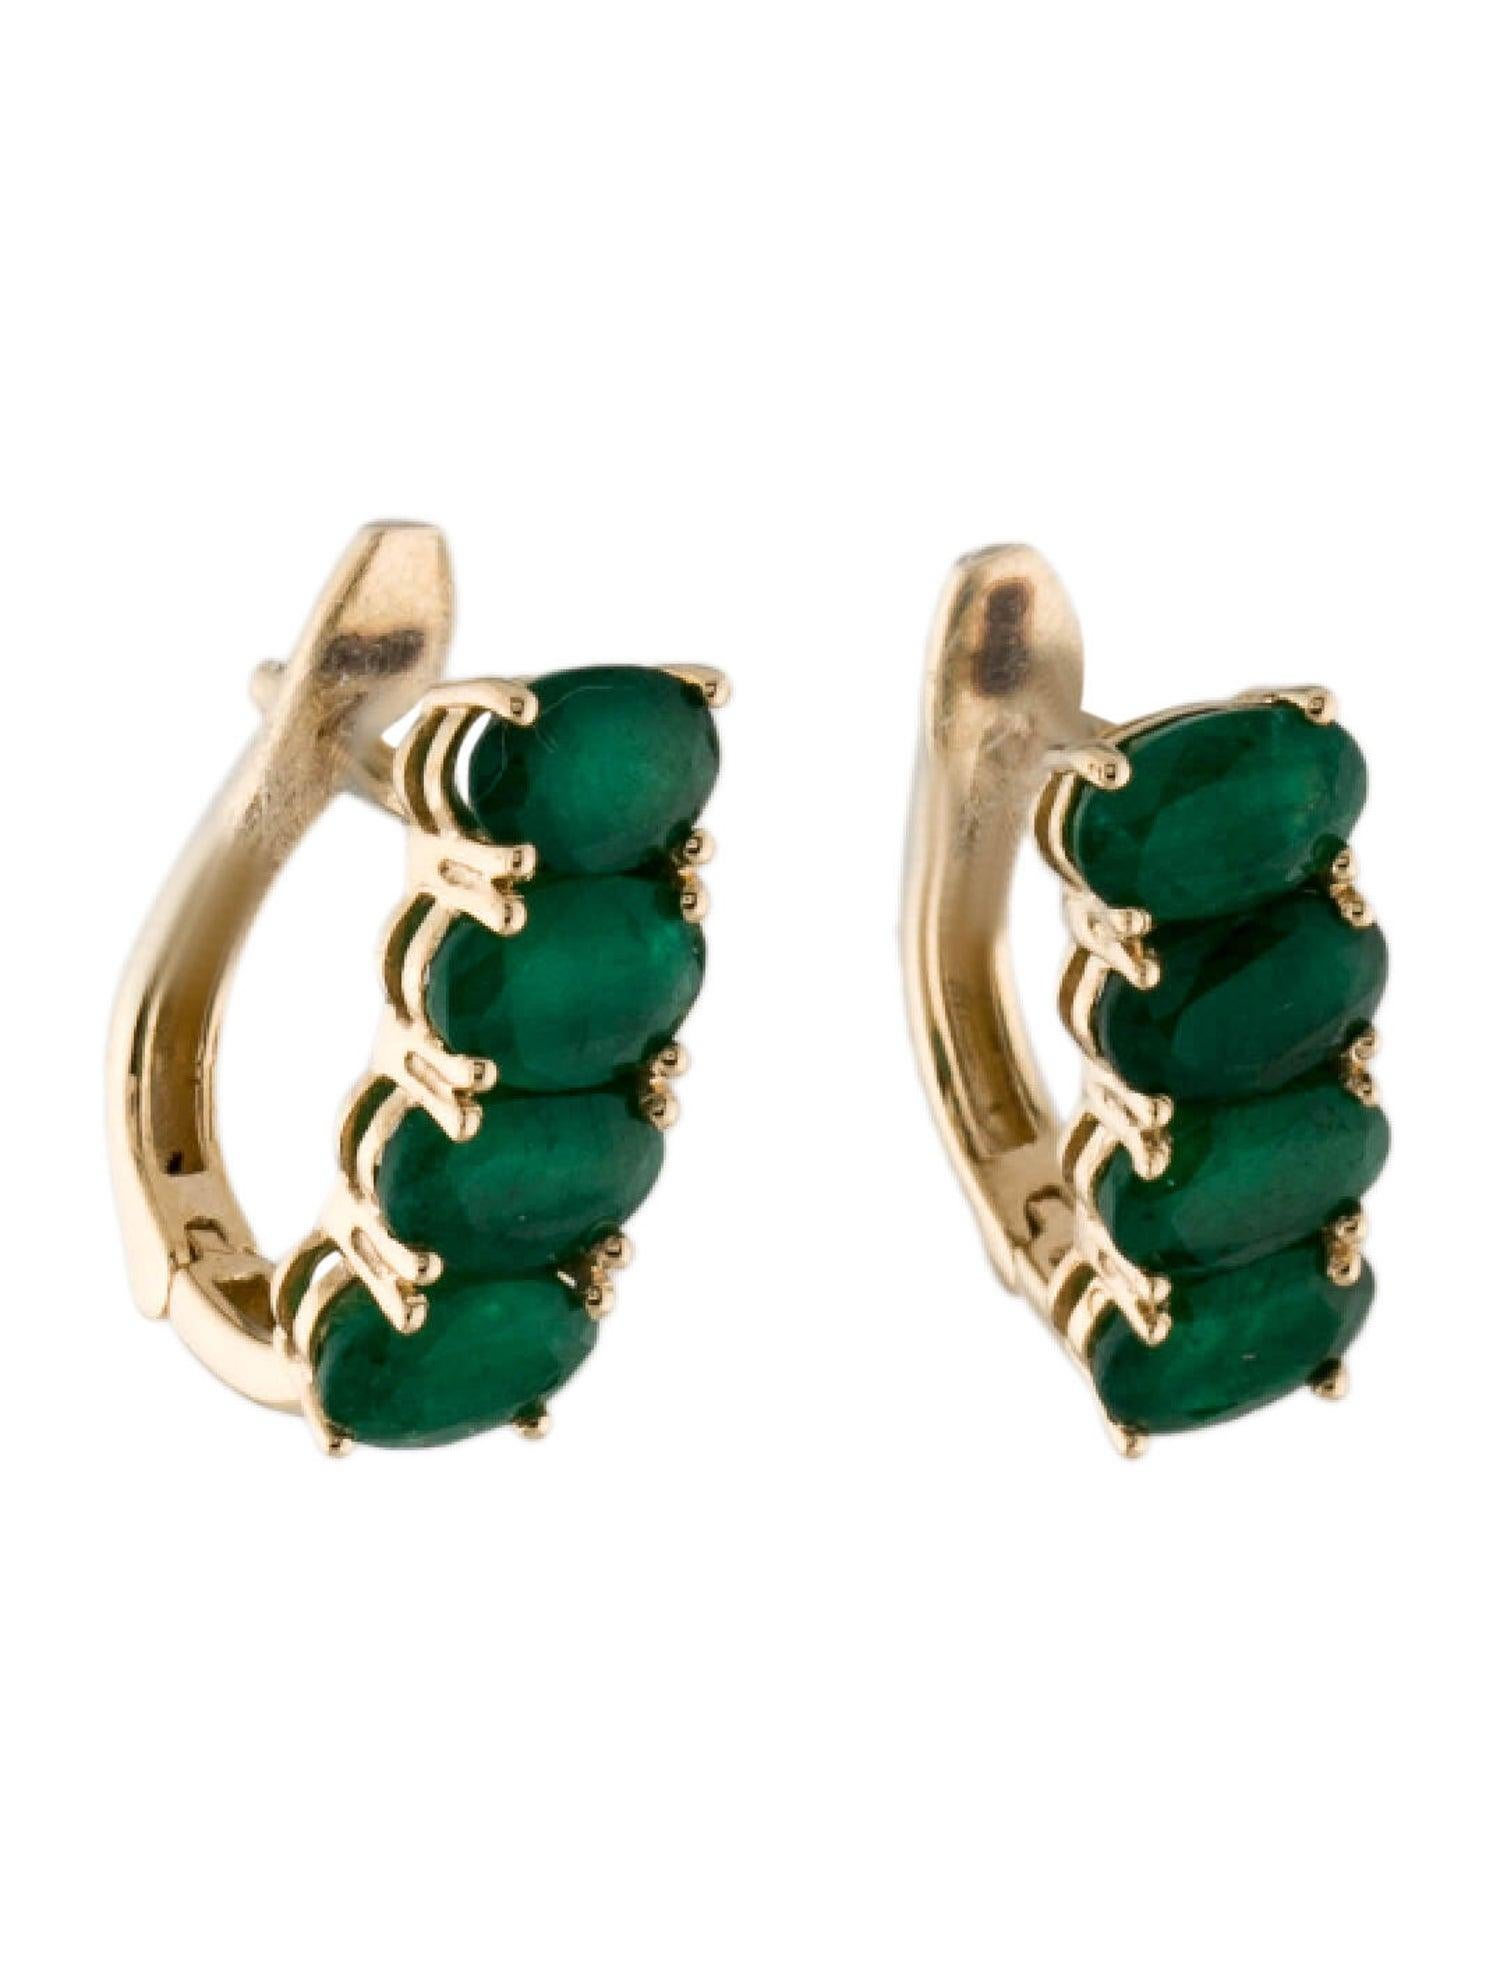 14K Emerald Earclip Earrings - 2.35ctw, Elegant Gemstone Jewelry, Classic Style In New Condition For Sale In Holtsville, NY